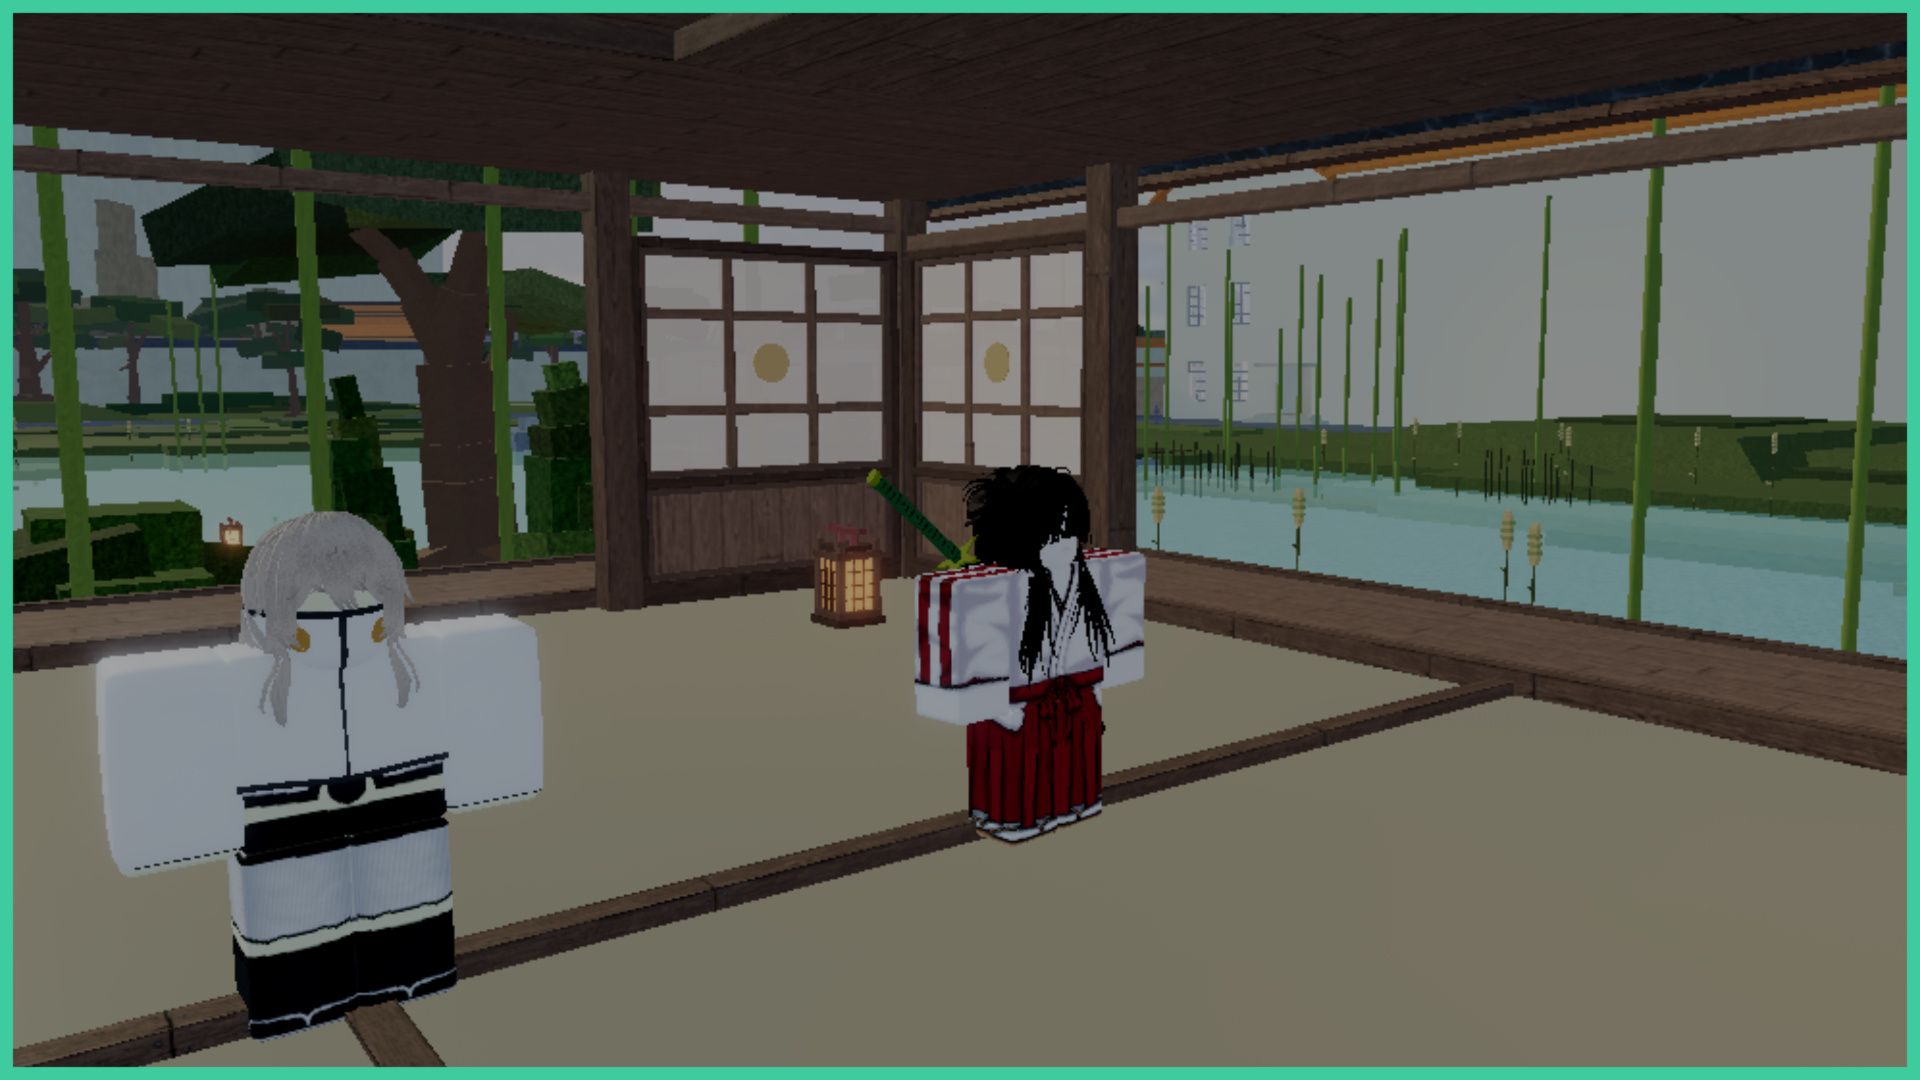 feature image for our type soul vasto lorde guide, it's a screenshot of a roblox player standing next to an NPC inside a traditional-style building with a river flowing by outside, with bamboo shoots and plants, with a wooden deck to sit on